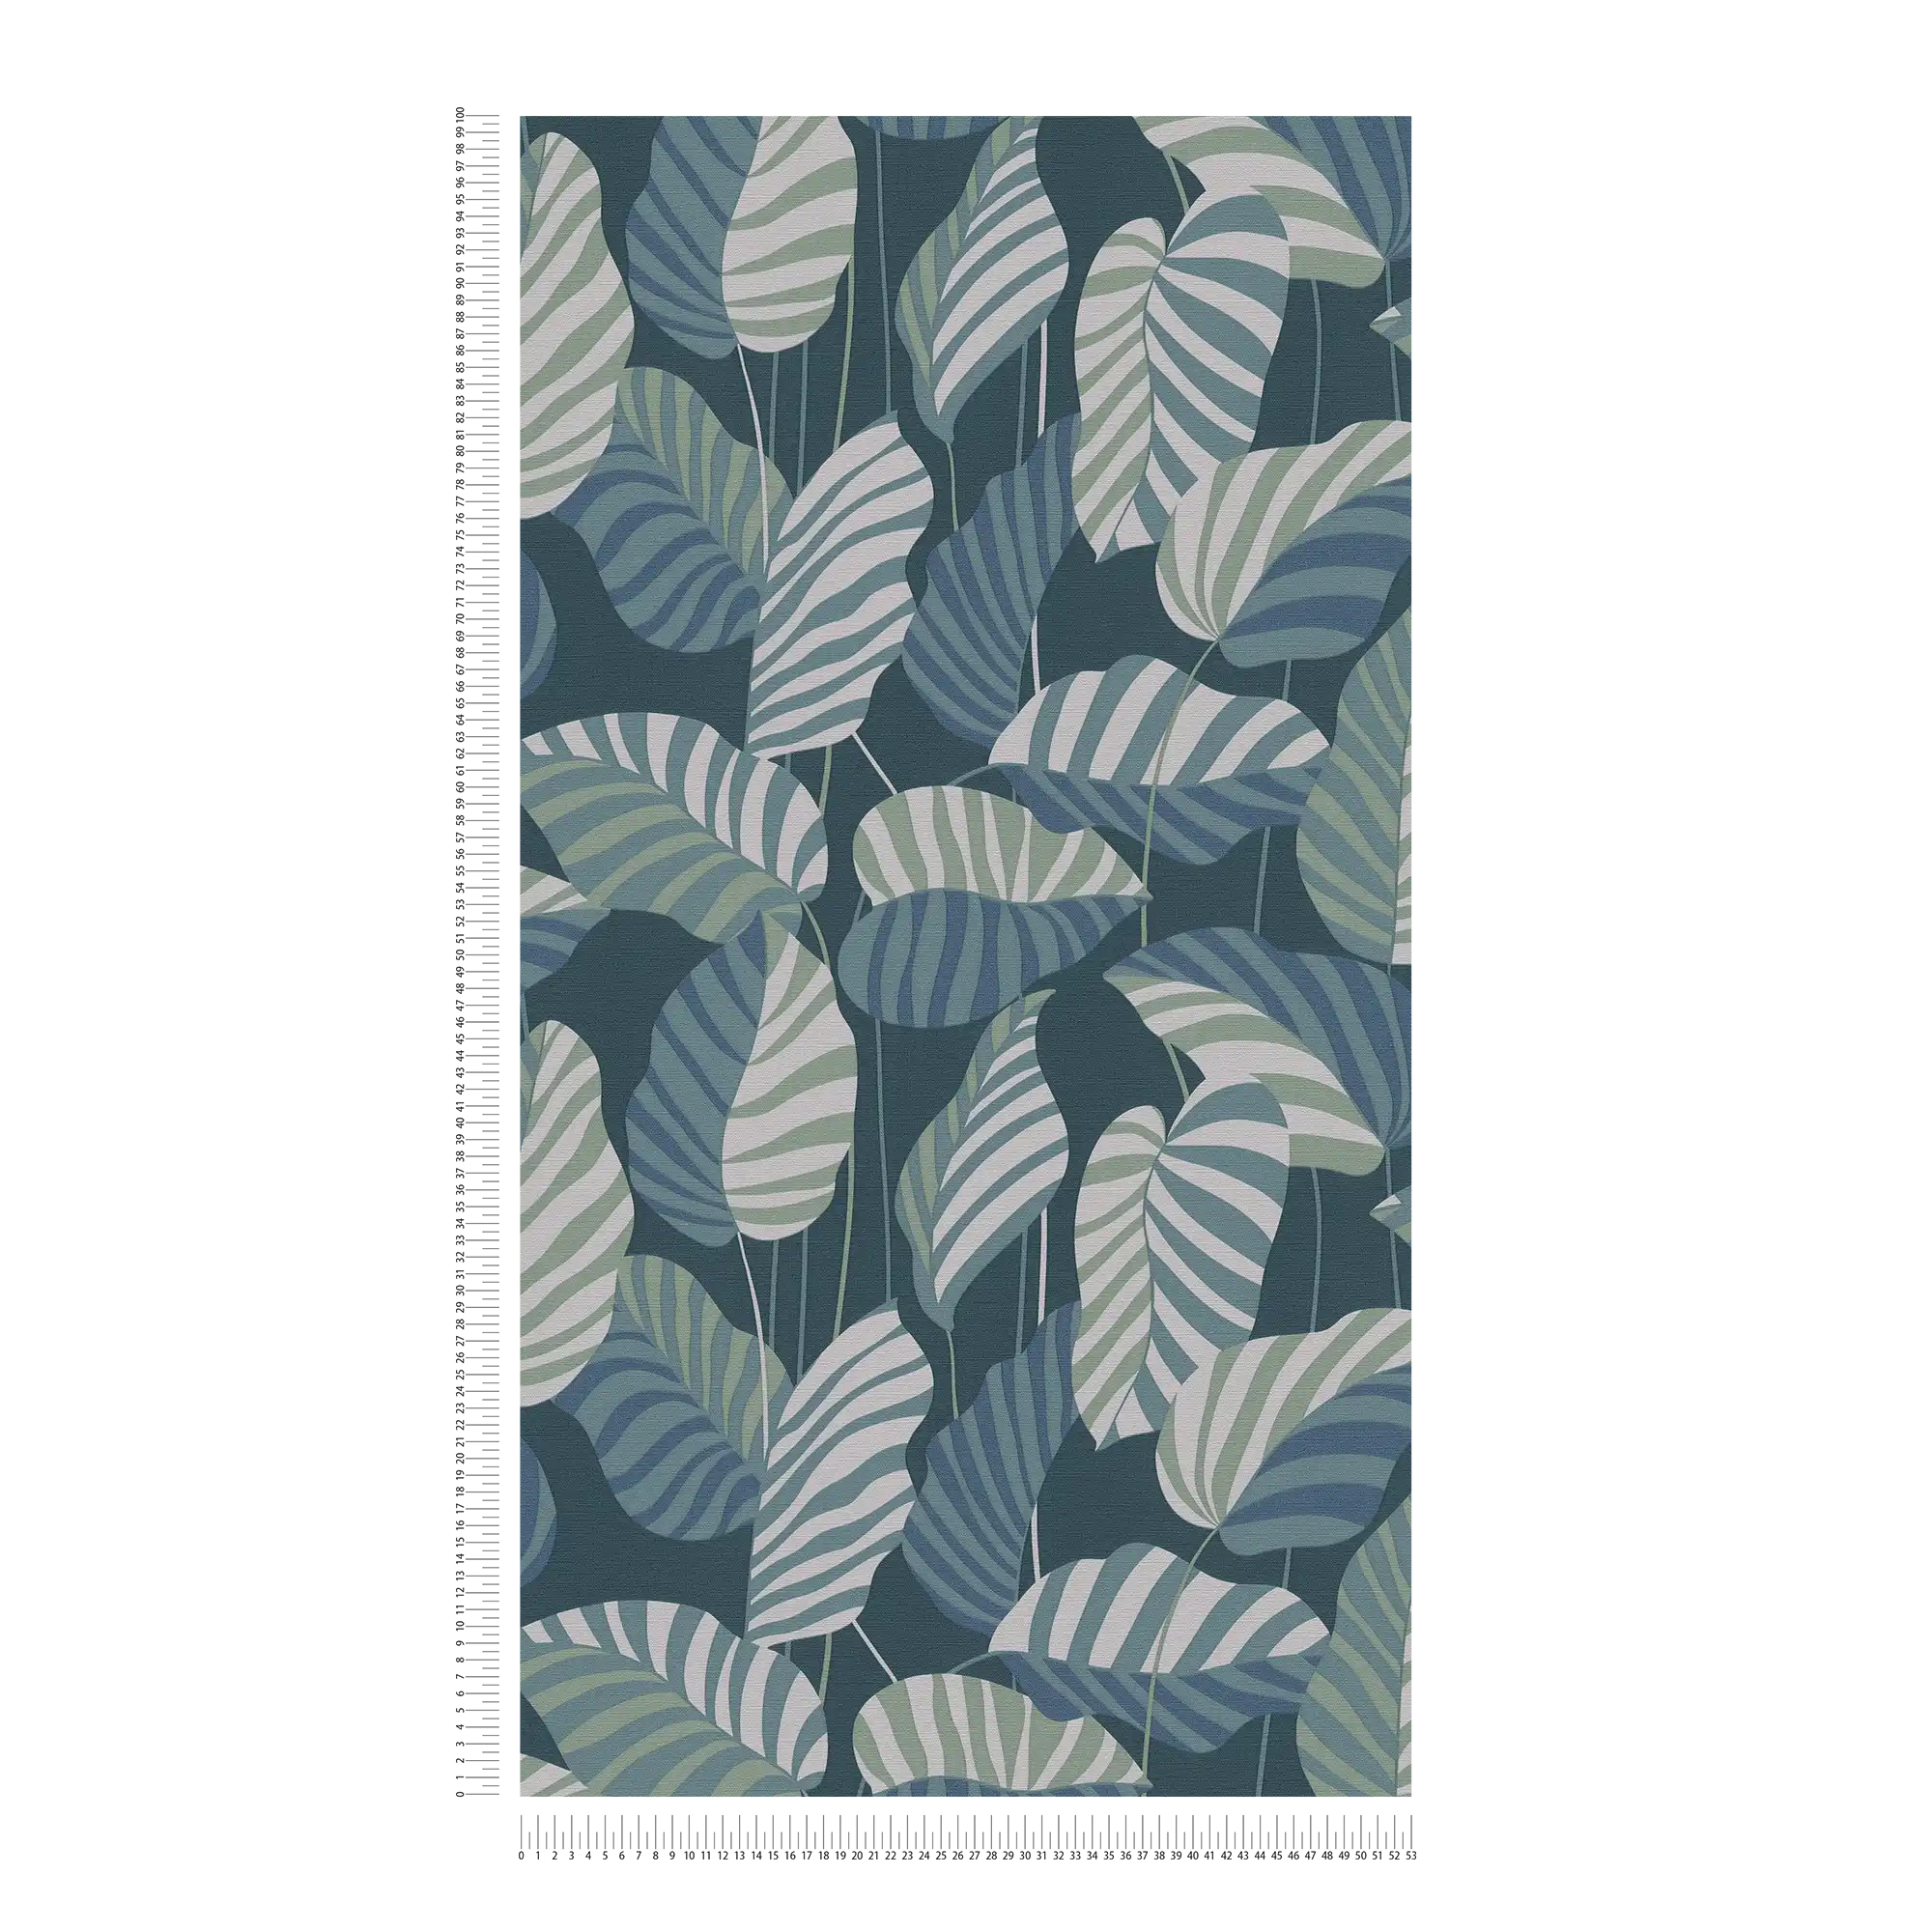             Jungle style non-woven wallpaper with leaves - blue, green, white
        